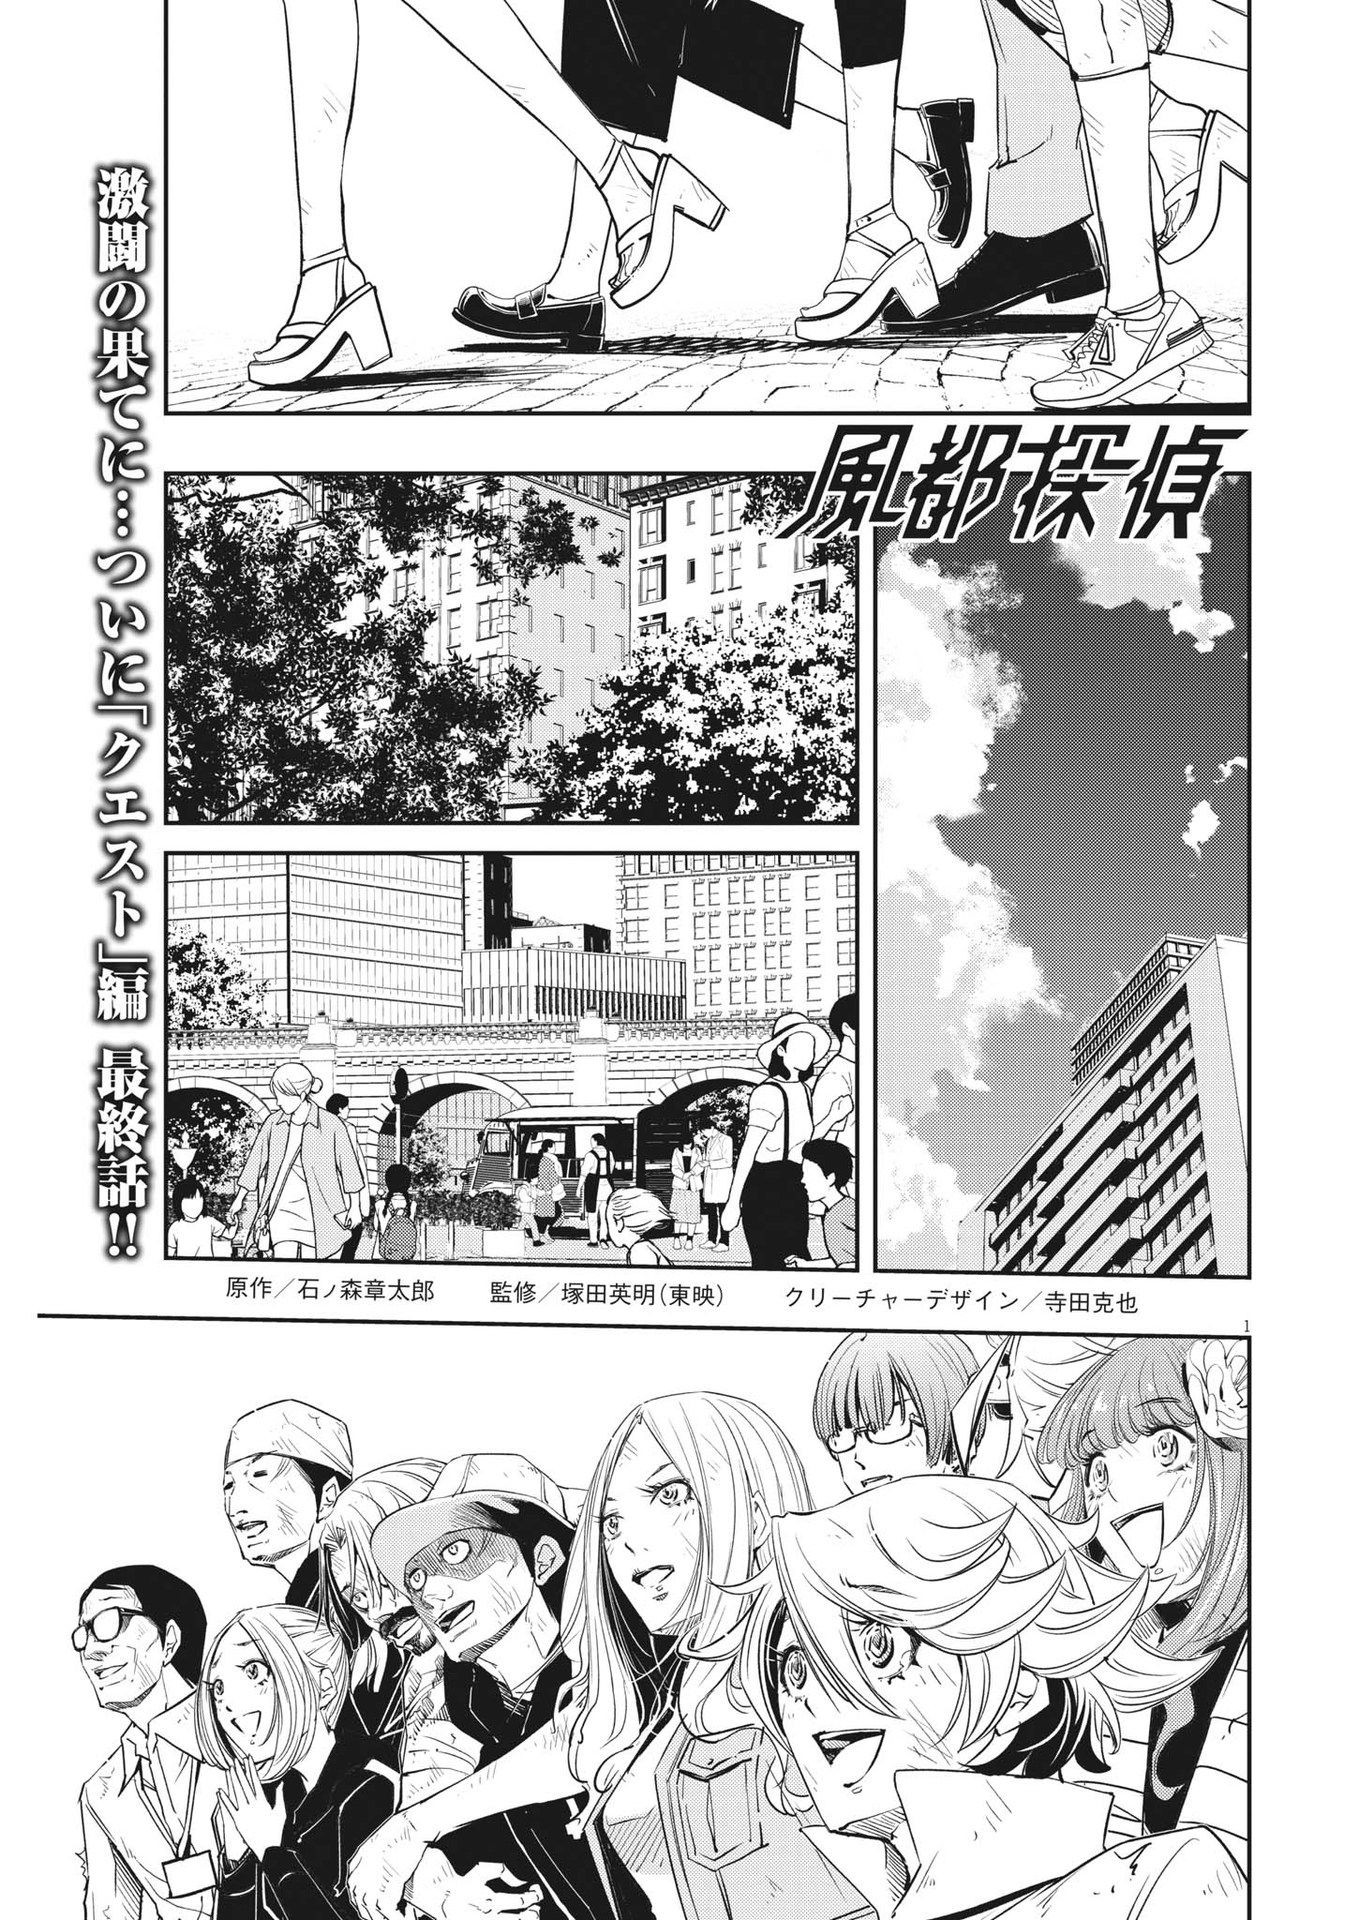 Kamen Rider W: Fuuto Tantei - Chapter 143 - Page 1